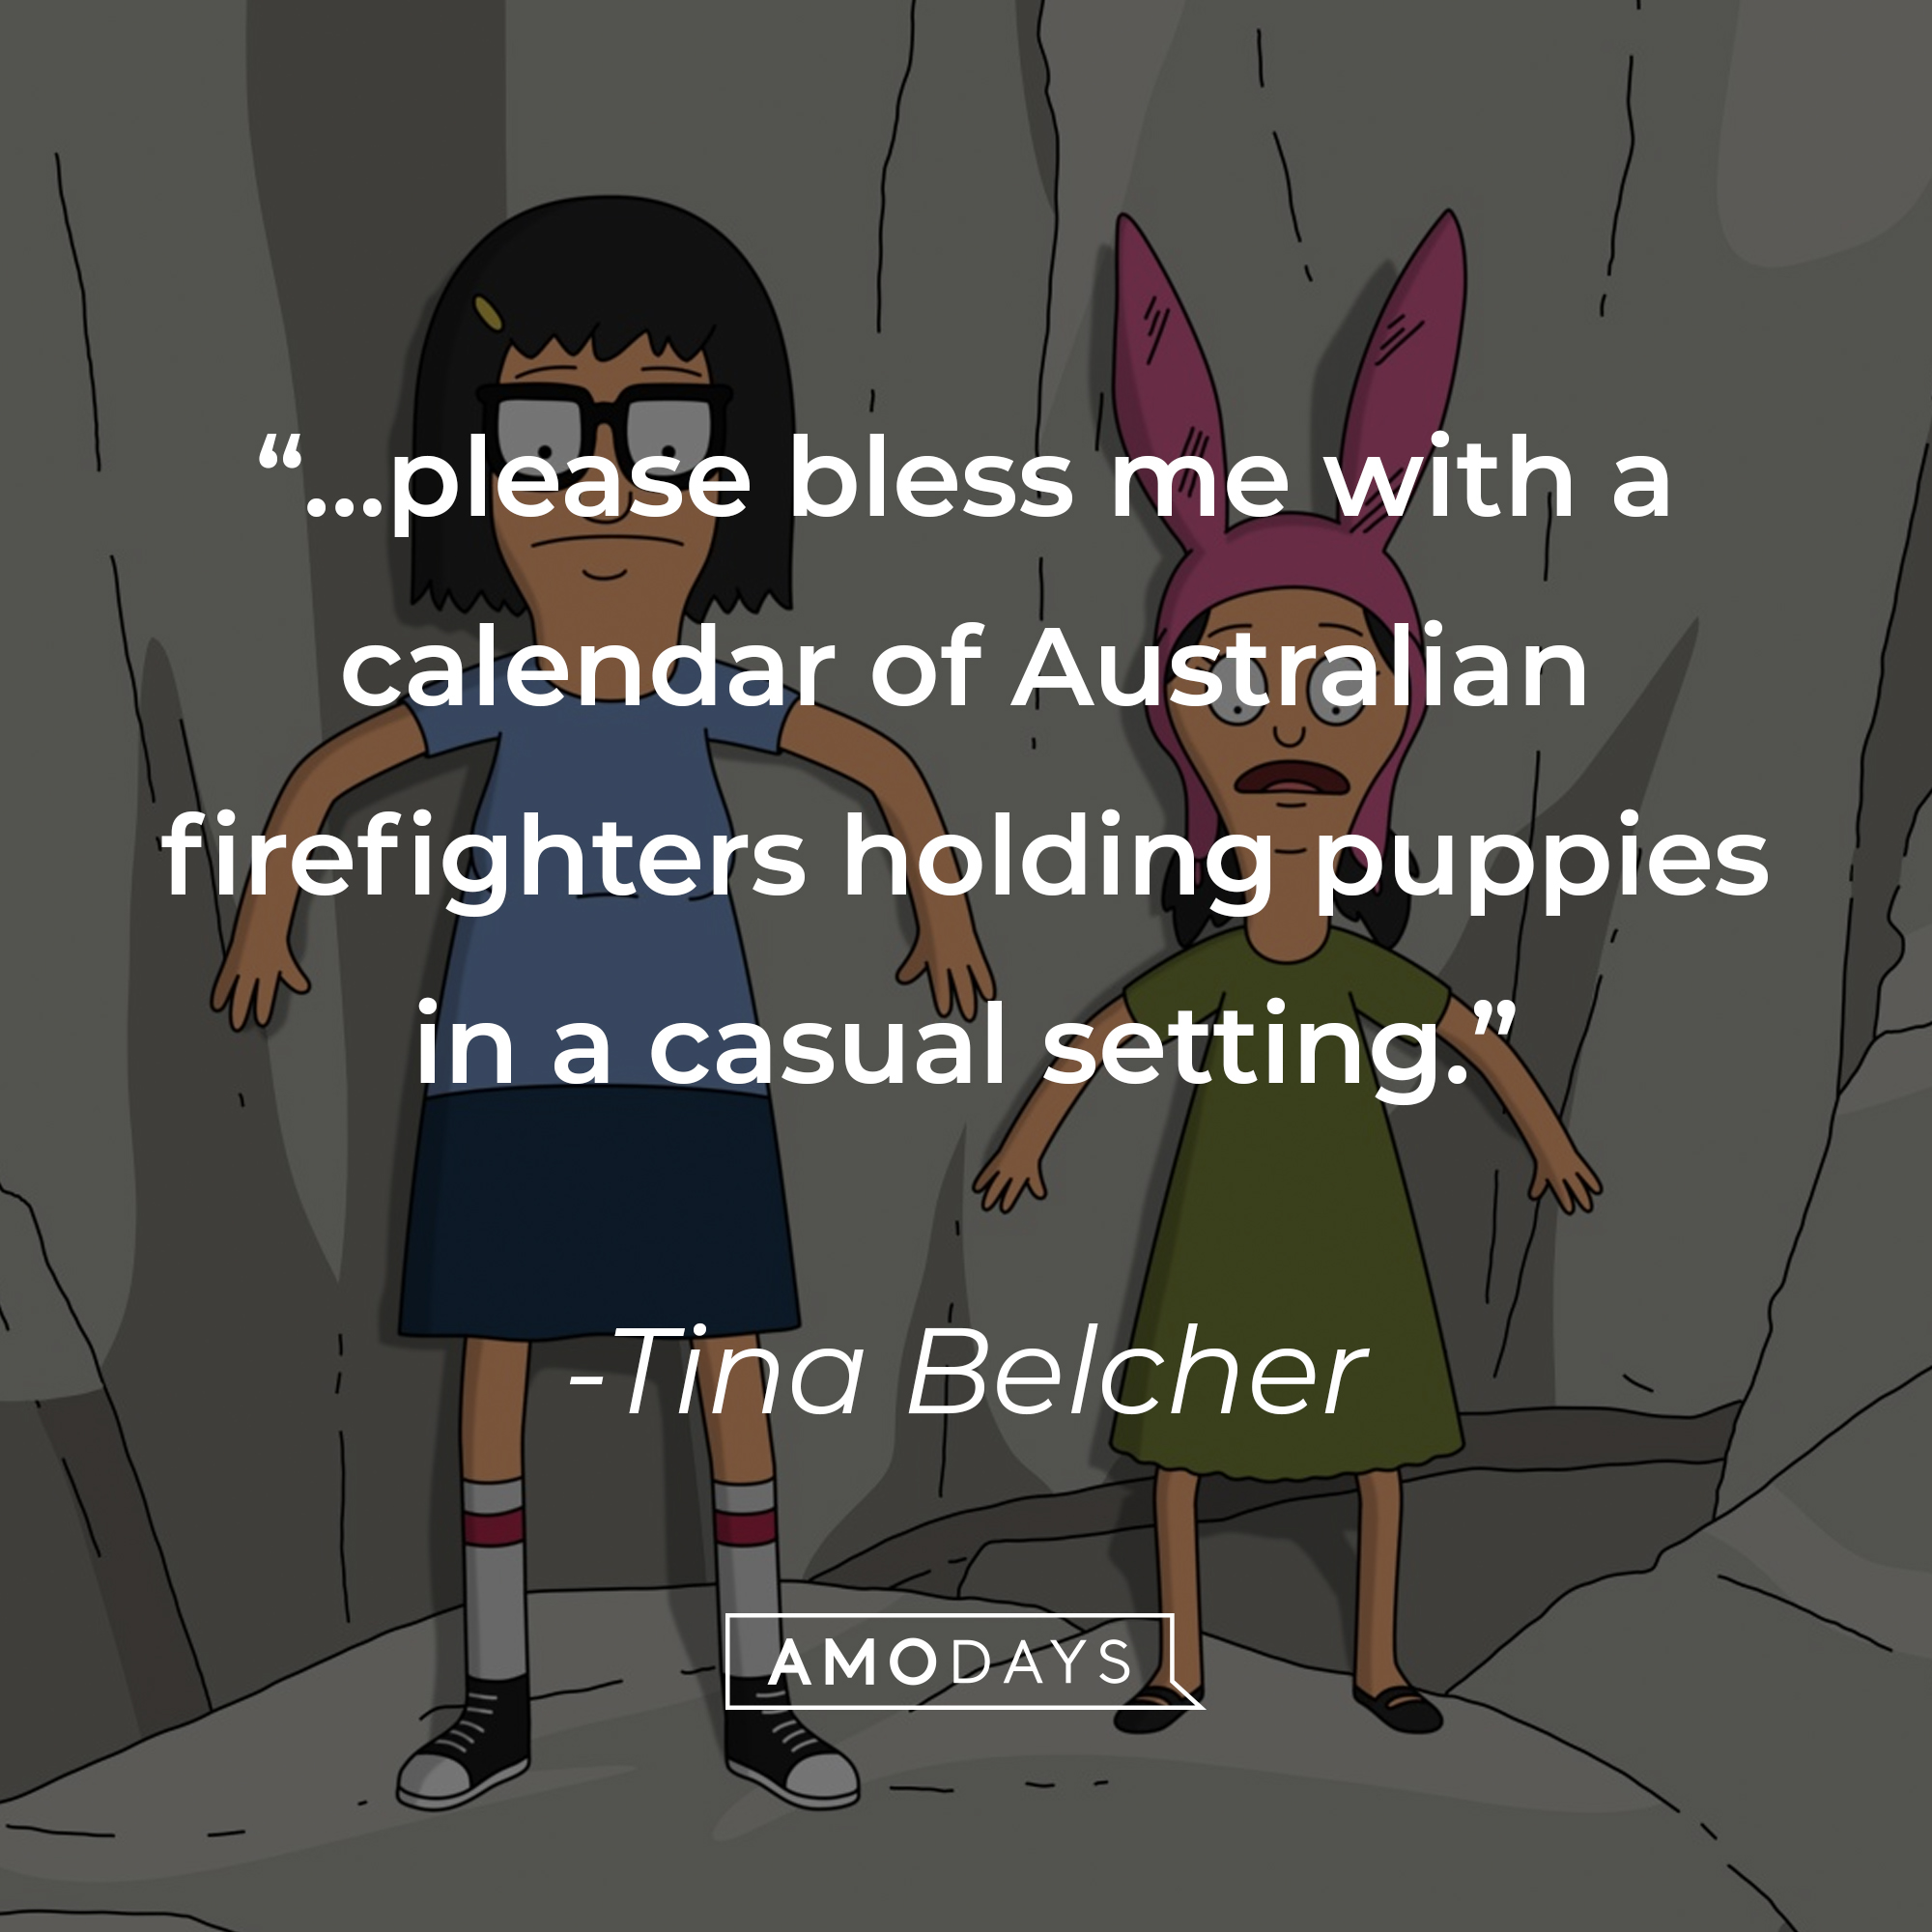 An Image of Tina Belcher with Louise, with Belcher’s quote: “...please bless me with a calendar of Australian firefighters holding puppies in a casual setting.” | Source: Facebook.com/BobsBurgers